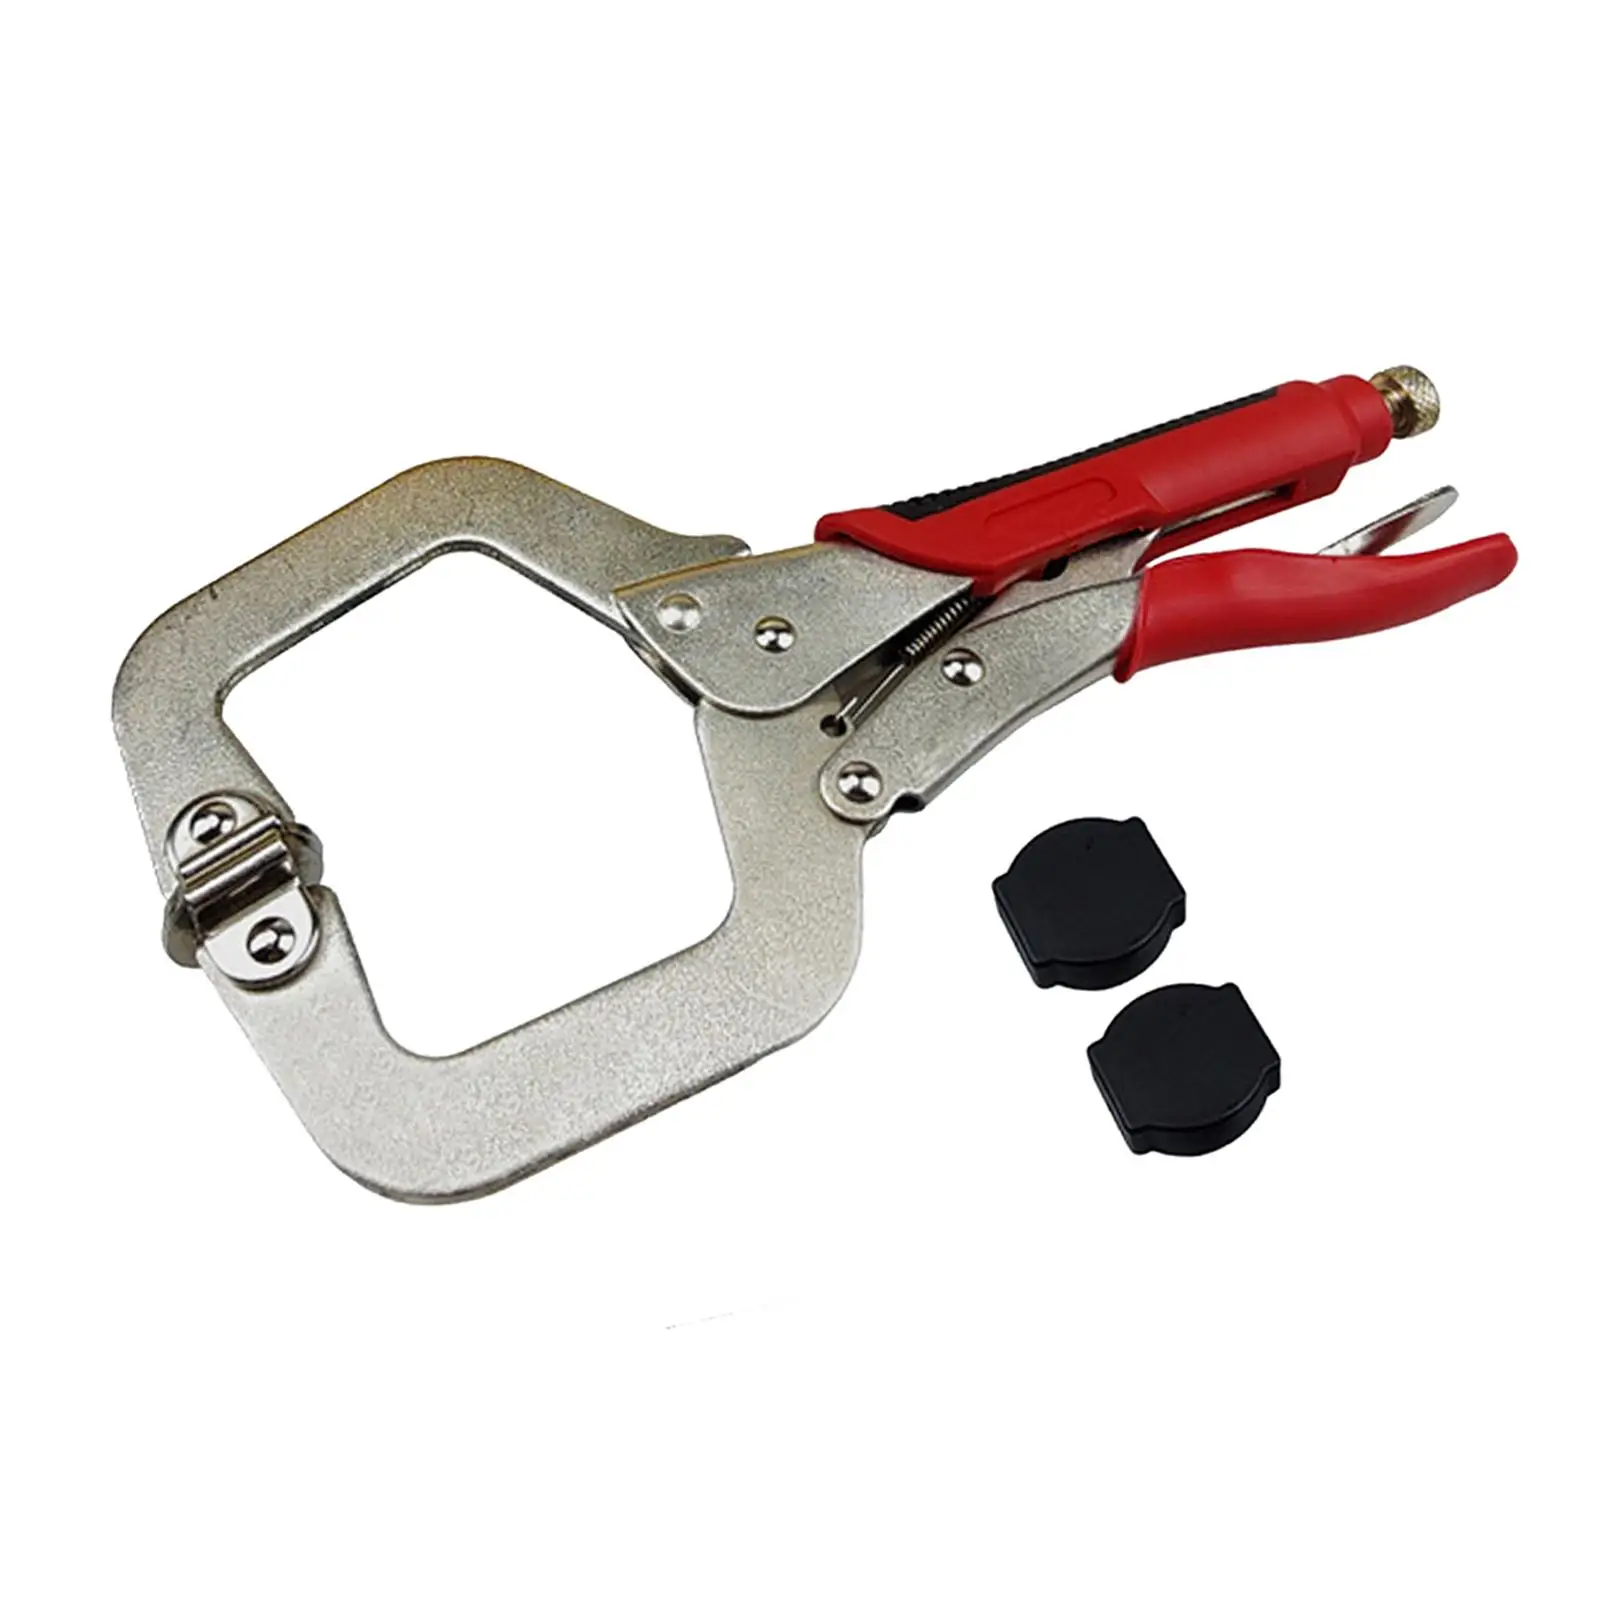 Welding Clamps Face Clamps with Pads for Hardware Mounting Tools Aligning